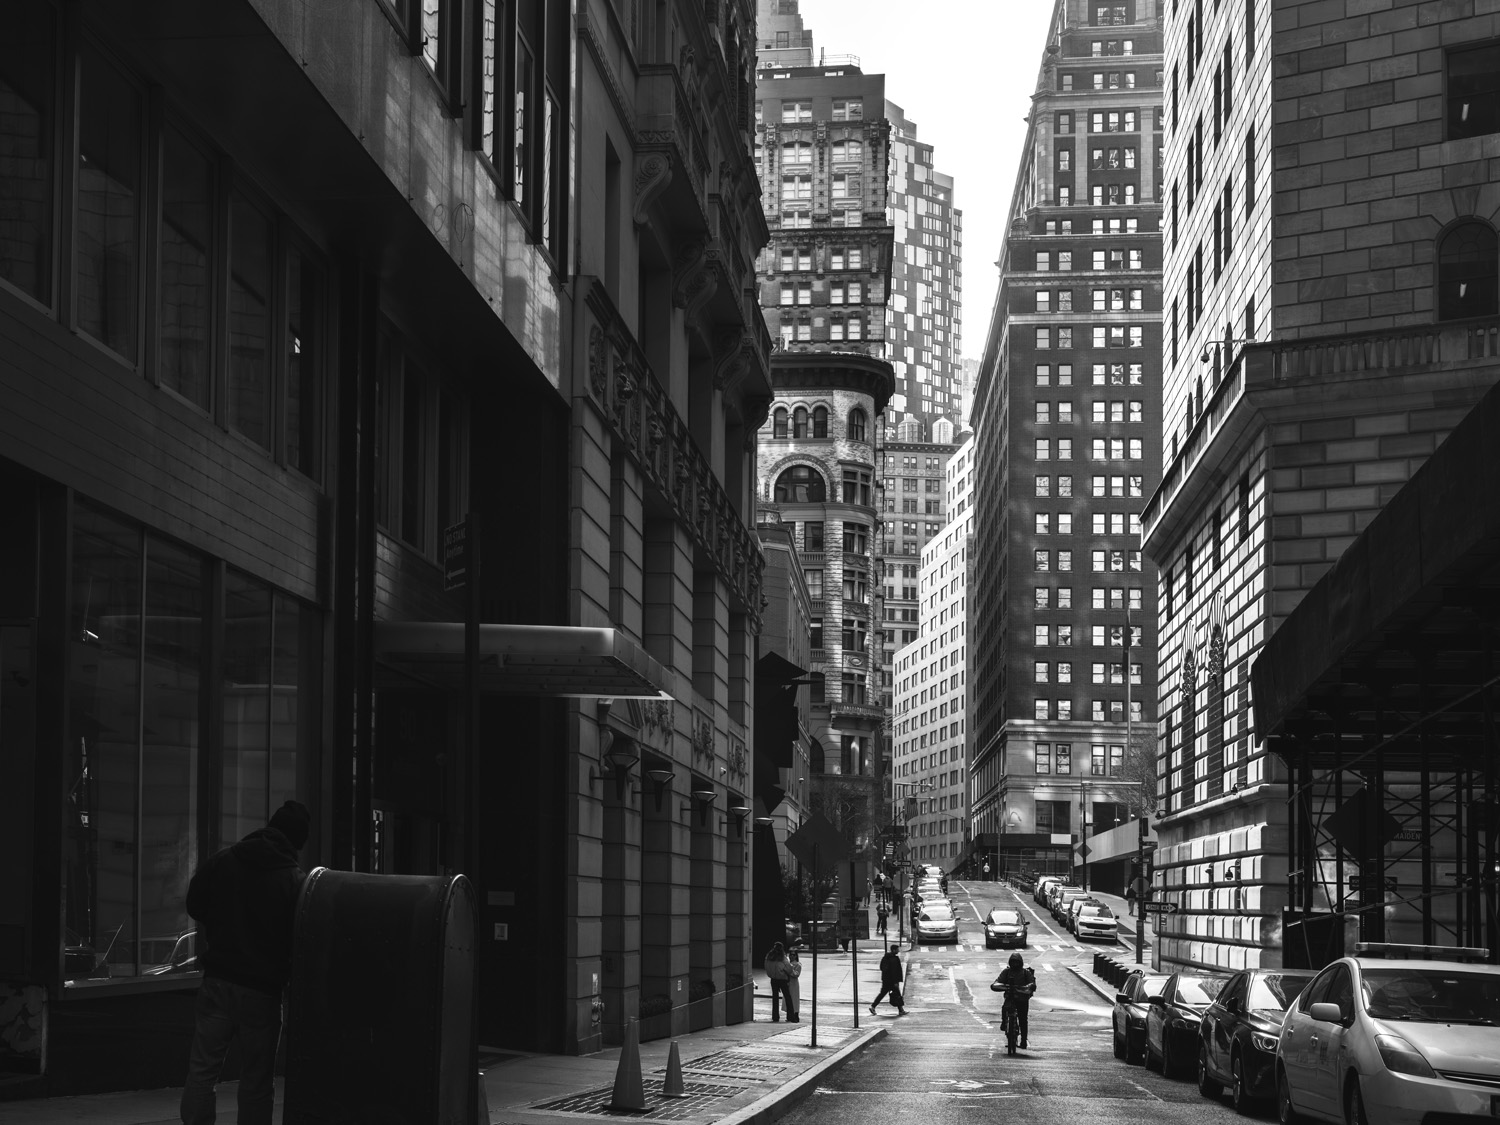 Black and white perspective shot of New York street